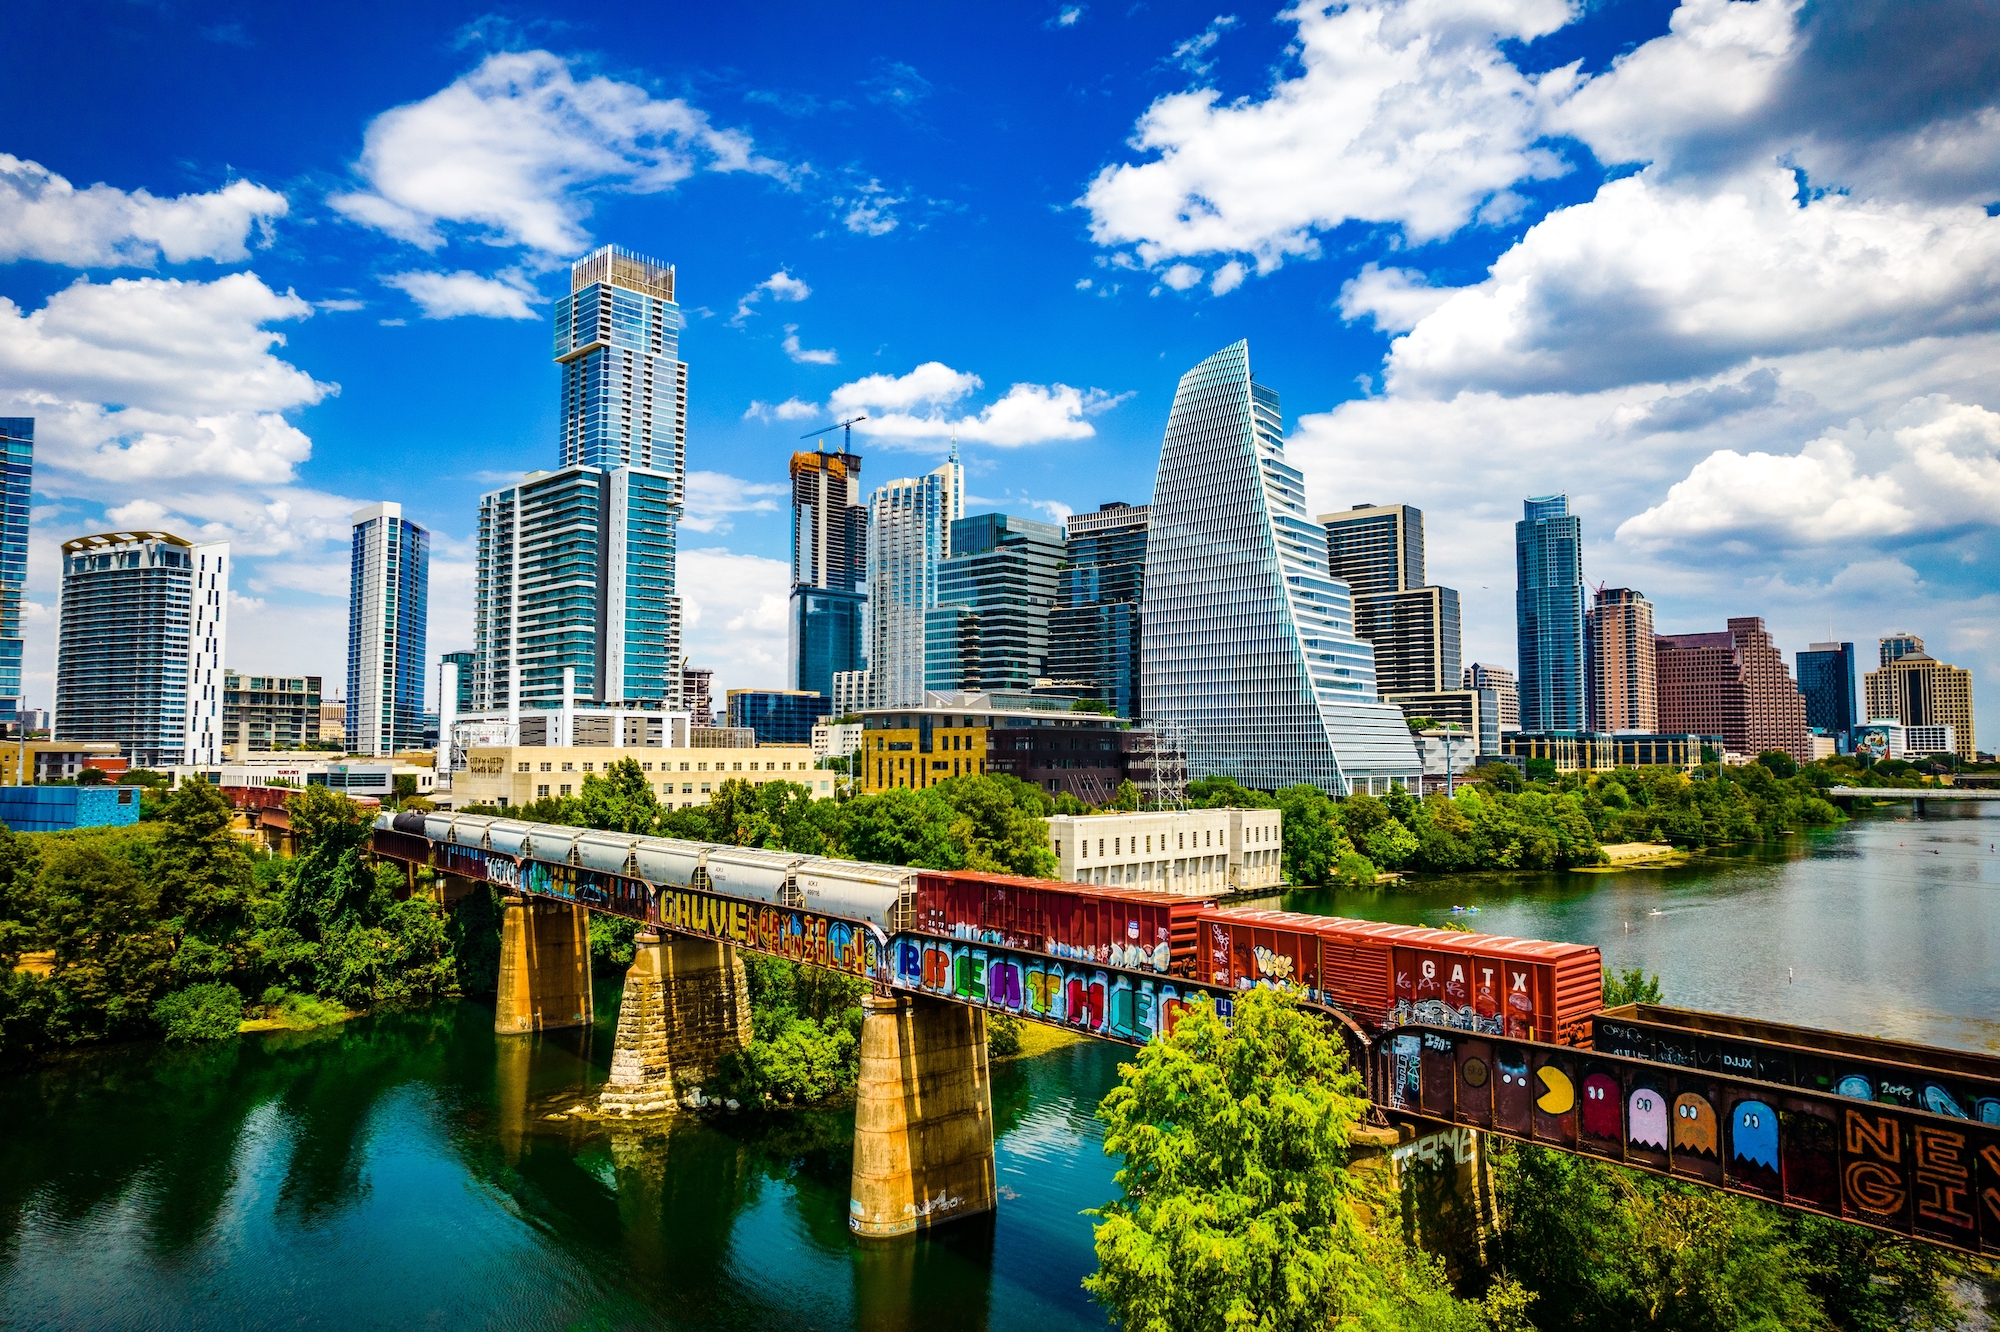 The Austin skyline is pictured.